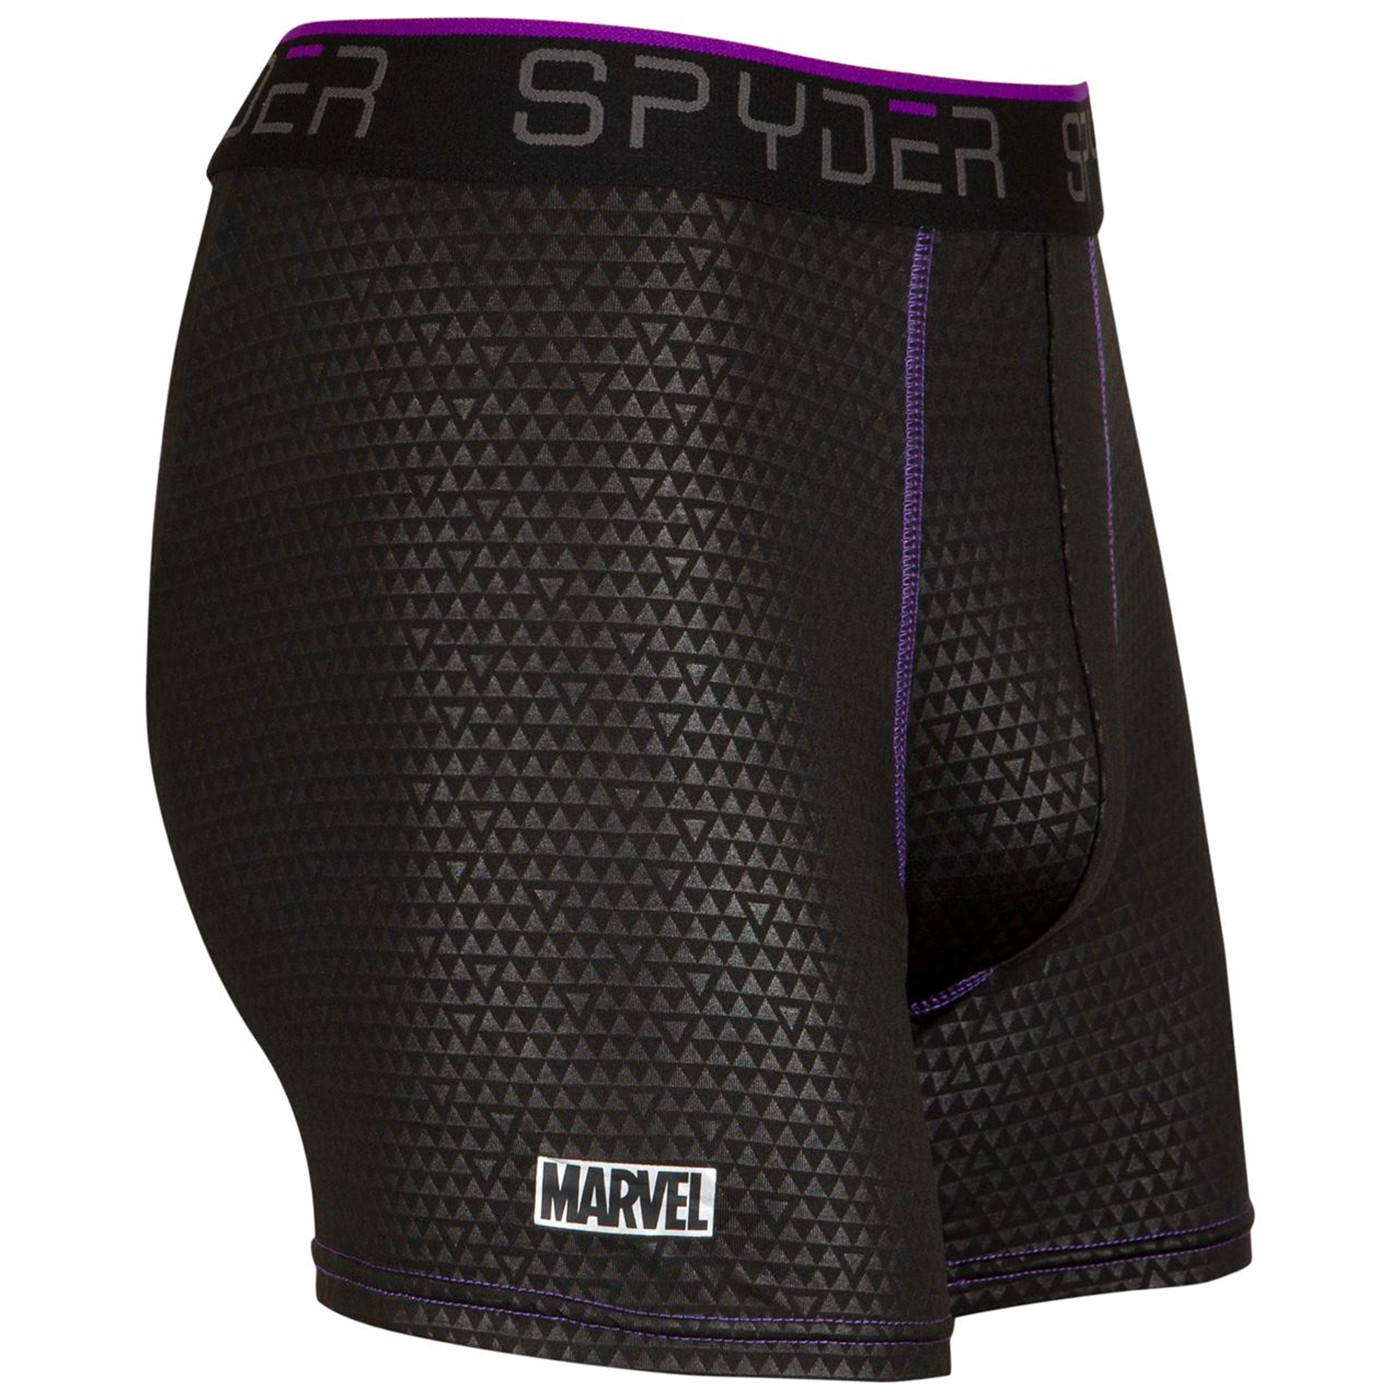 Black Panther Spyder Performance Sports Boxer Briefs 3-Pair Pack